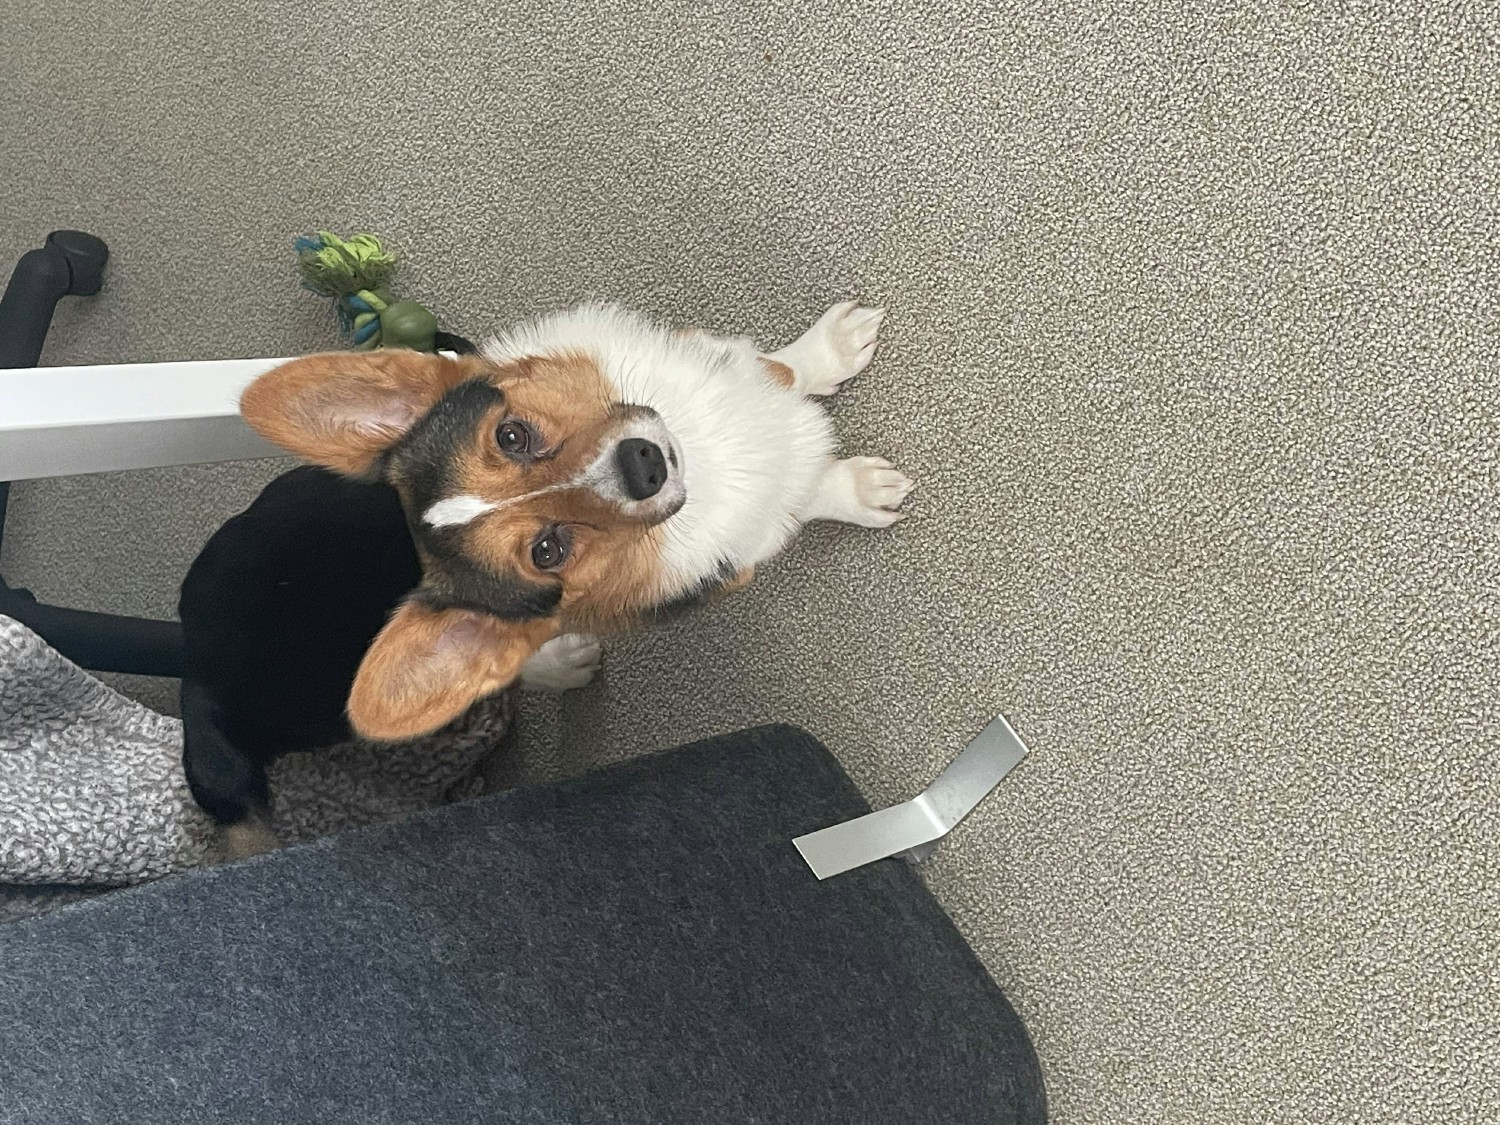 Employees often bring their pets to the office